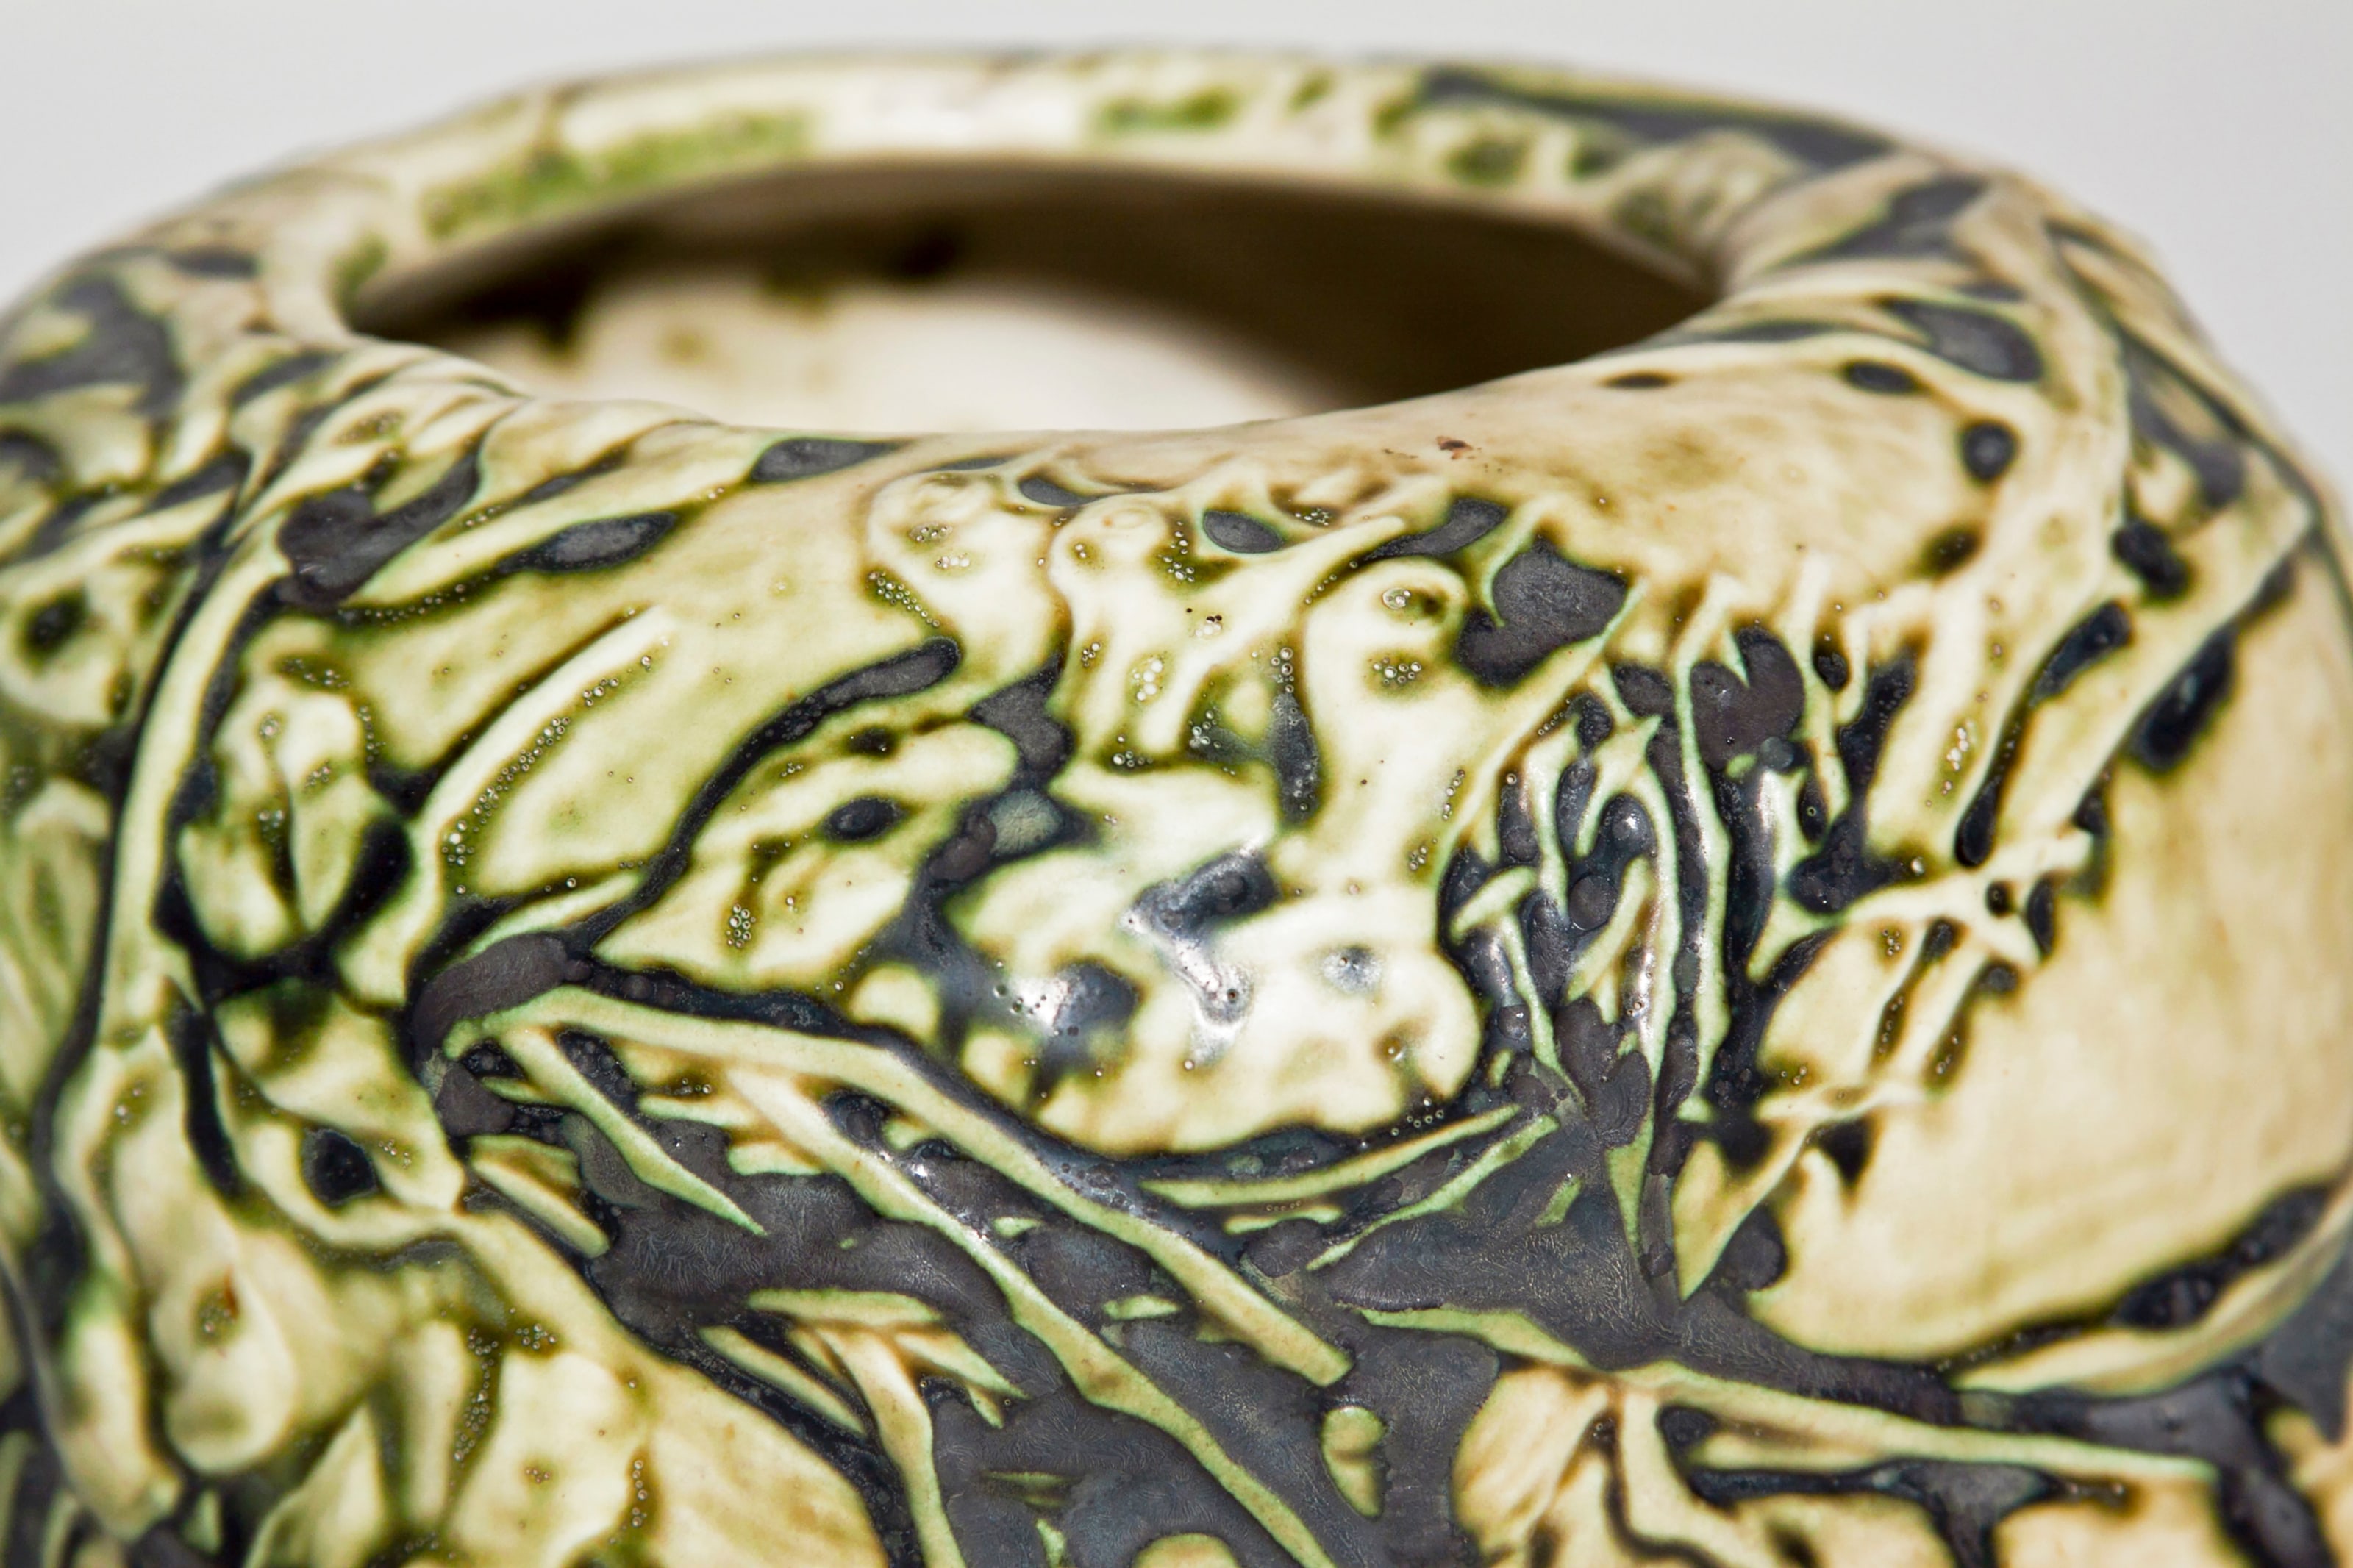 a detail showing the bubbly irregular texture and contrast between high gloss and matte recesses of the tiffany studios old ivory favrile pottery glaze